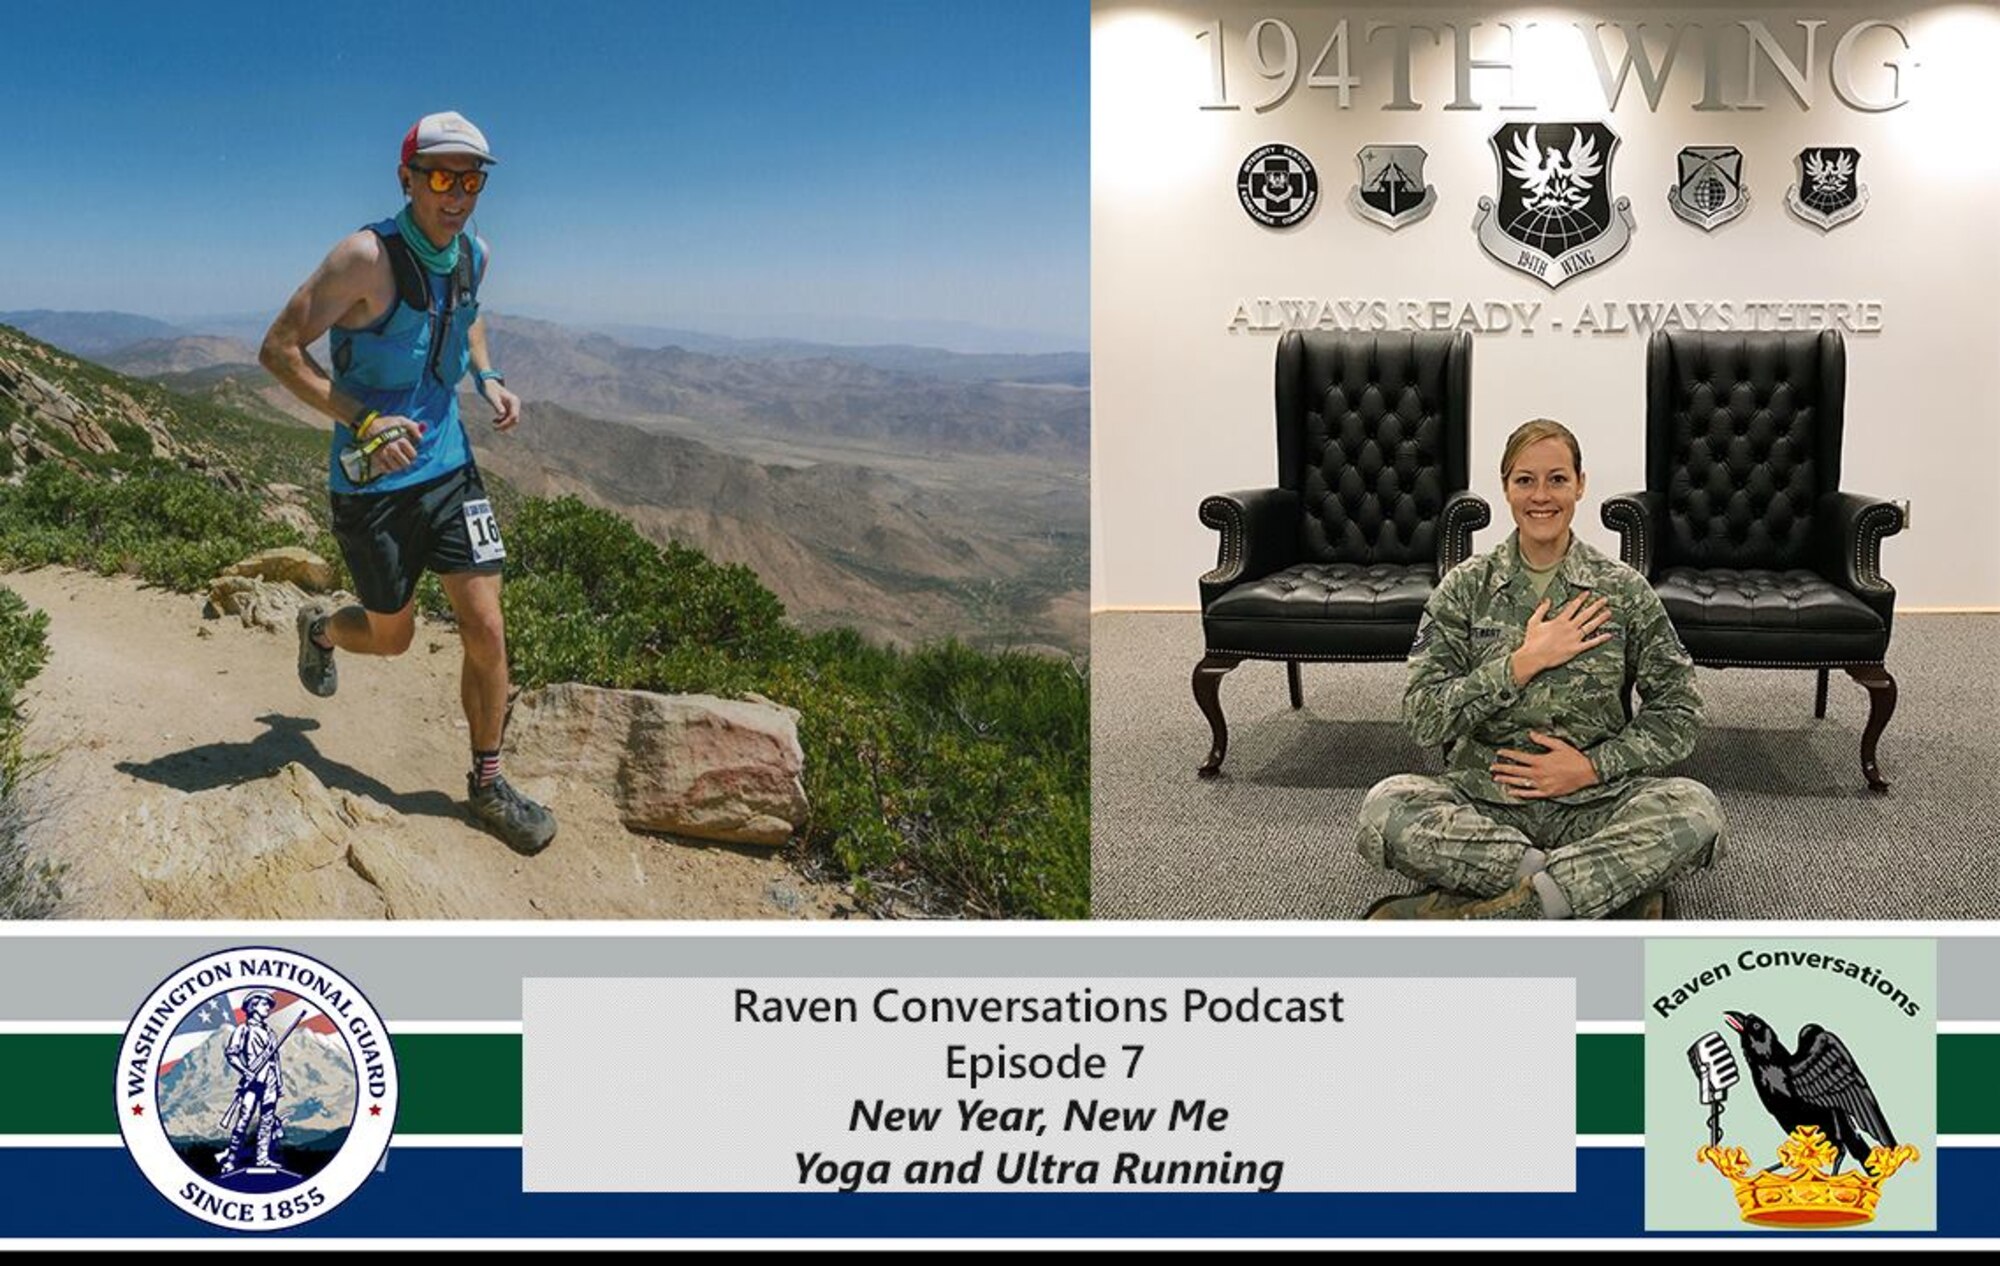 The first episode of the 2019 Washington National Guard Raven Conversations is avaliable on iTunes.  In eposide 7, Jason Kriess and Sara Morris talk with Master Sgt. Samantha Stewart with the 194th Wing about the free yoga class she teaches every Wednesday at 11:15 a.m. in building 109 at Camp Murray, Washington.  The second half of the podcast, 1st Lt. Krosby Keller, 225th Air Defense Squadron air battle manager, talks about his experiences with ultra-running and competing in two 100 mile races.  The podcast can be found at https://itunes.apple.com/podcast/id1437664943?id=1437664943